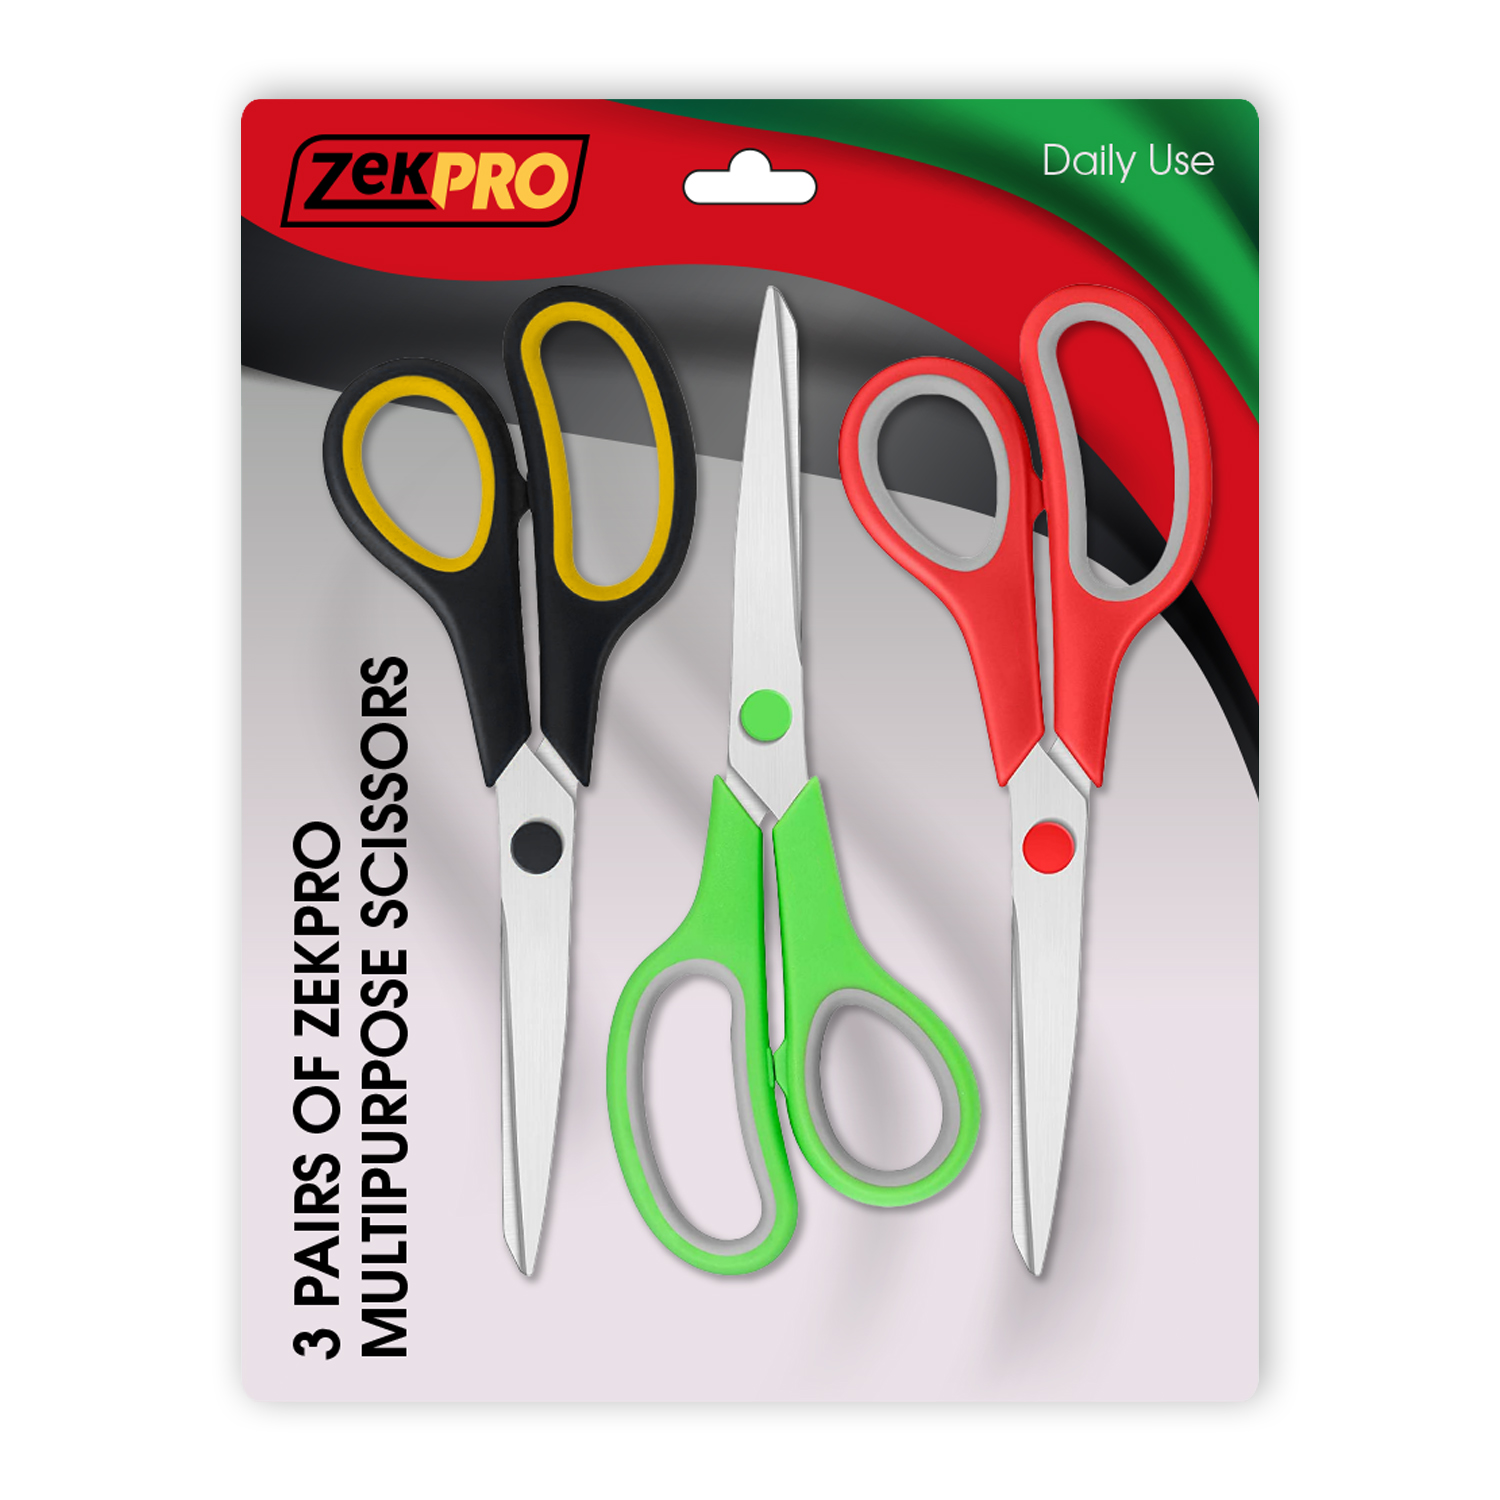 ZekPro 3 Pack Scissors 8" Craft Scissors All Purpose, Heavy Duty Sharp Blade Shears Sewing Scissor for Office, Fabric and School Supplies Left - Right Handed - image 2 of 10